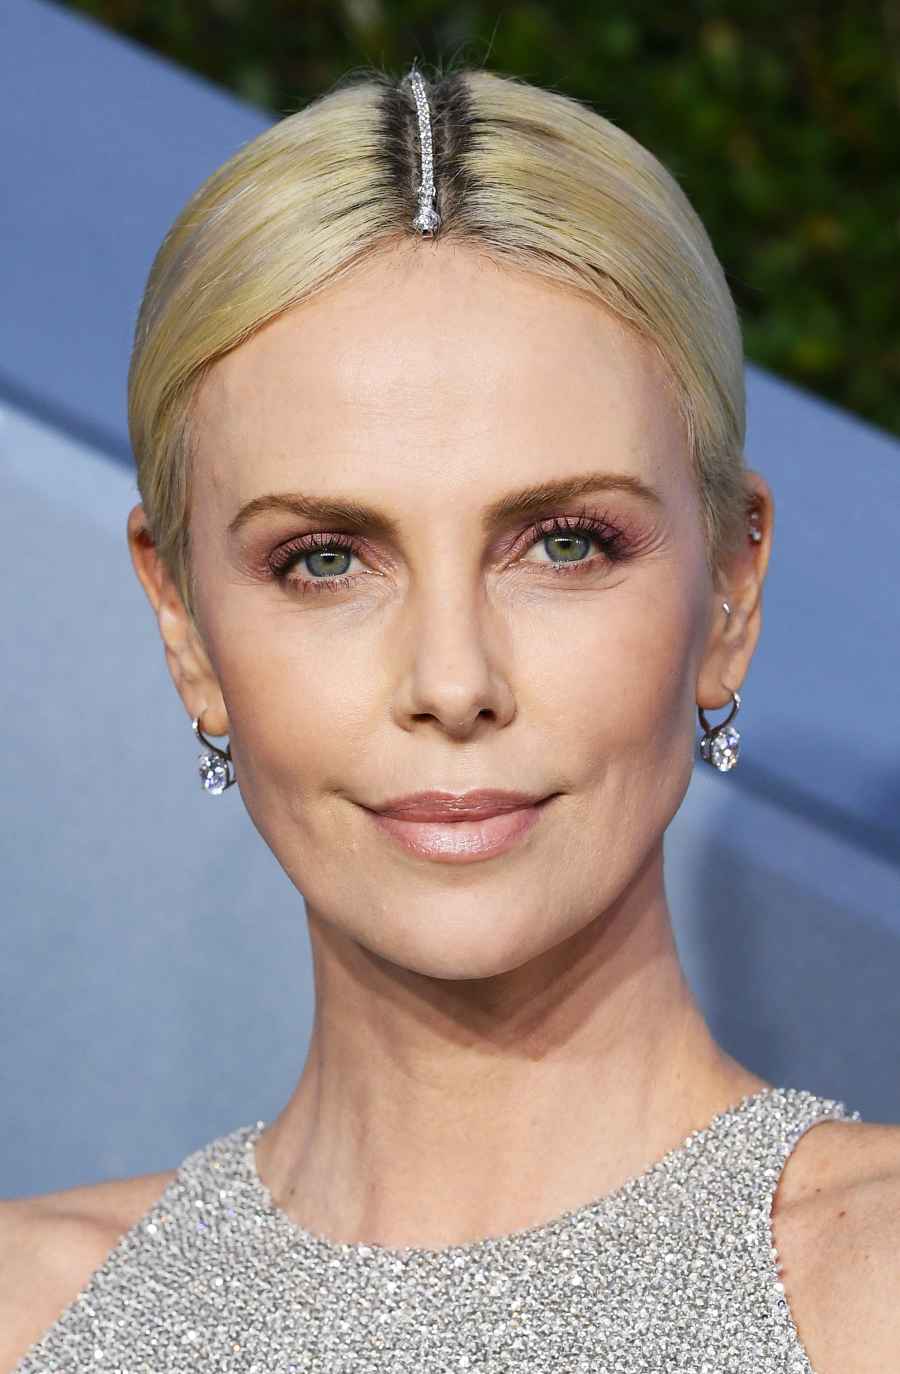 SAG Awards 2020 Best Bling - Charlize Theron